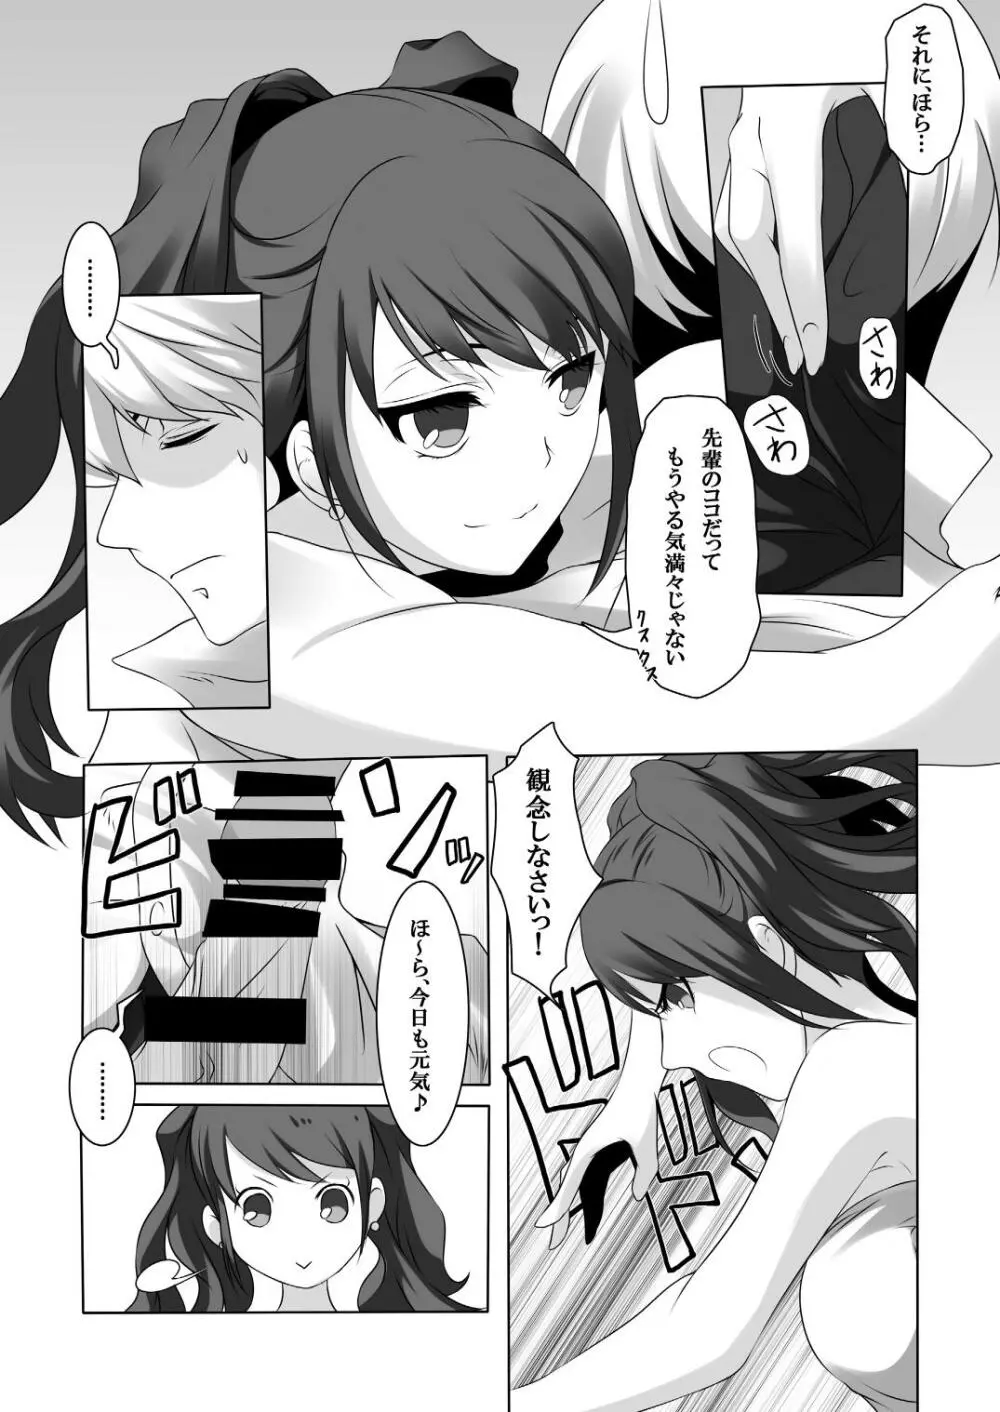 Persona 4: The Doujin #3 #4 Page.20